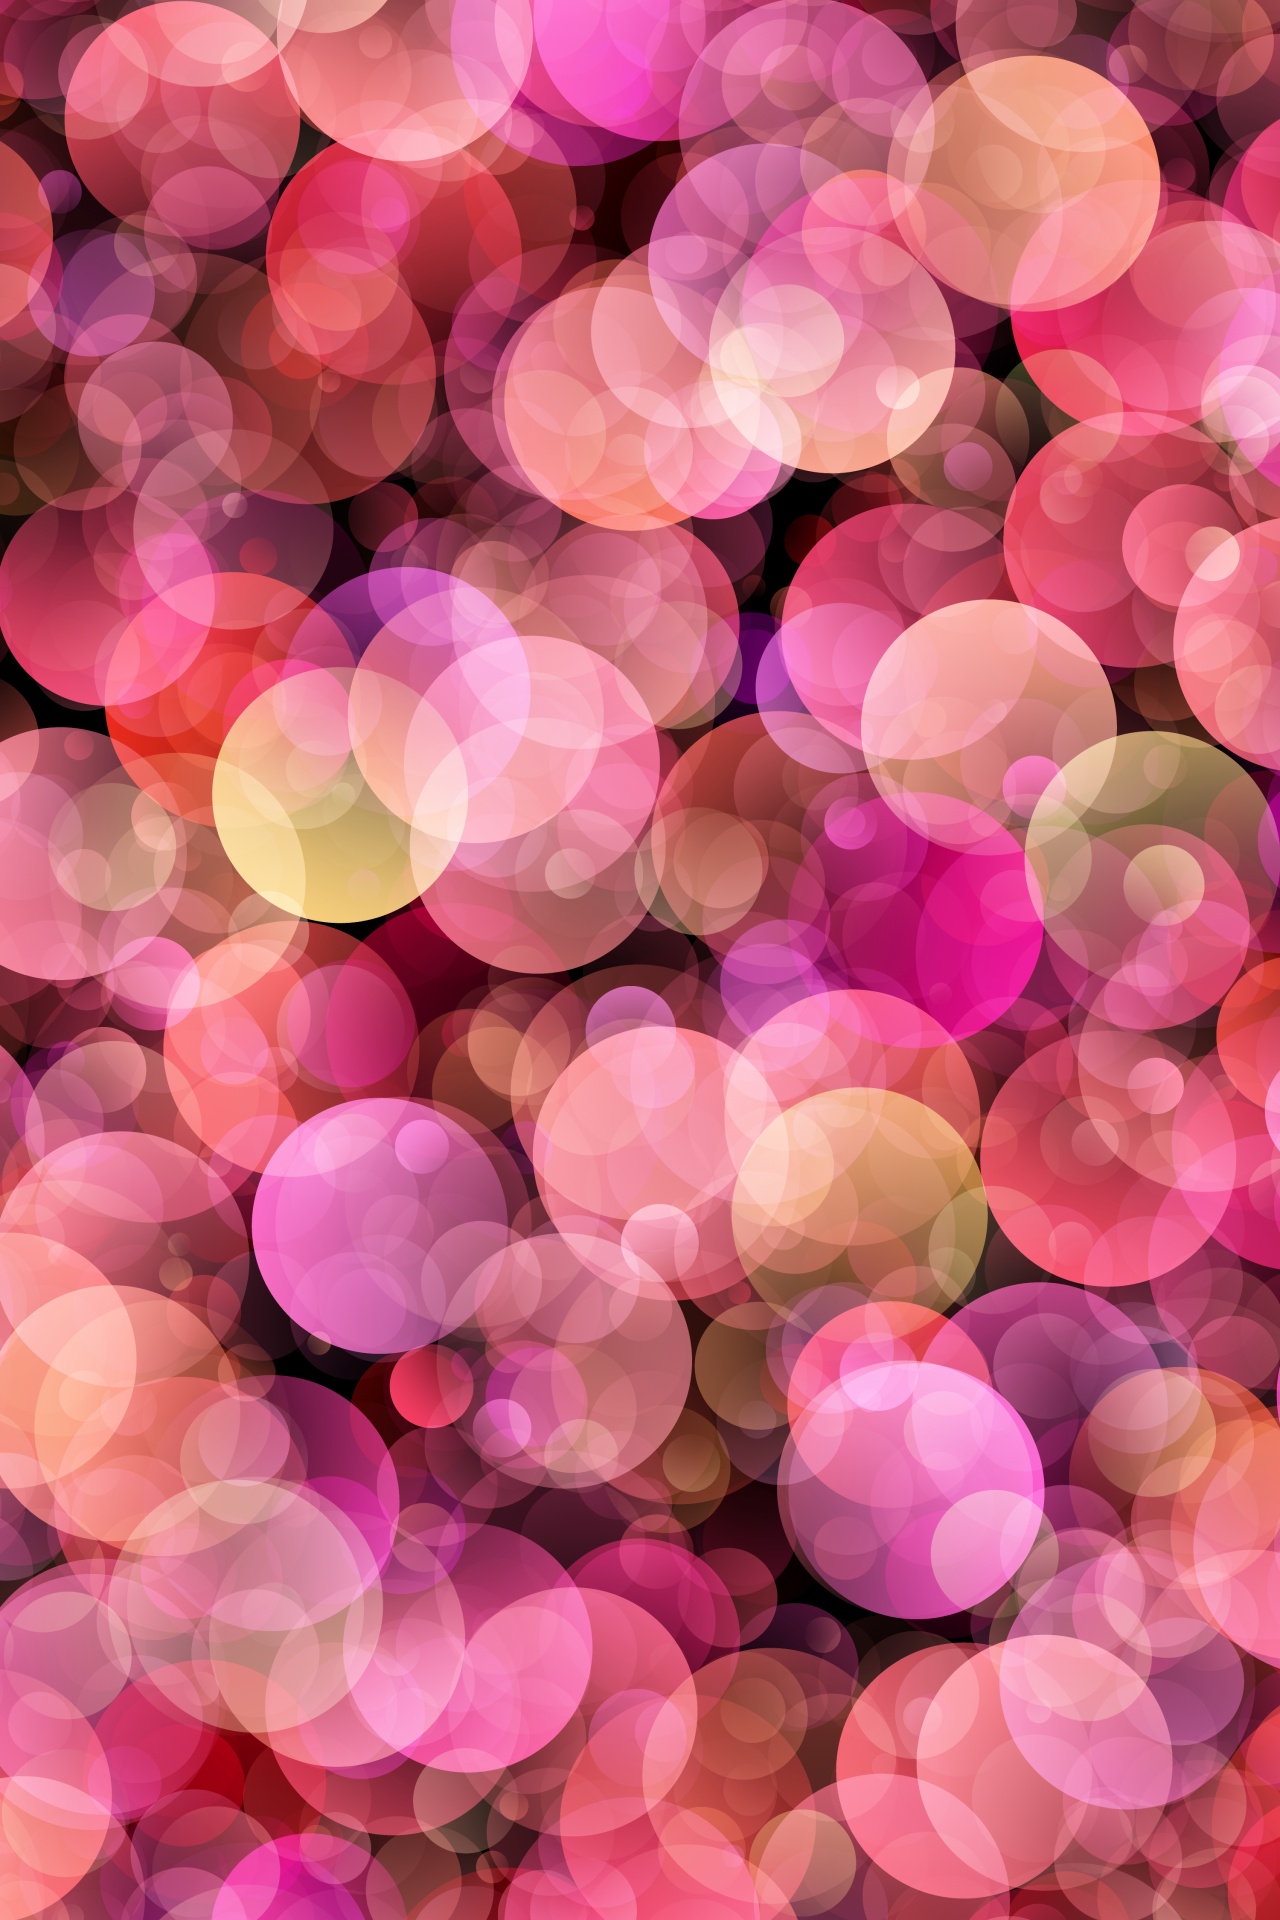 Abstract Bokeh Texture Background